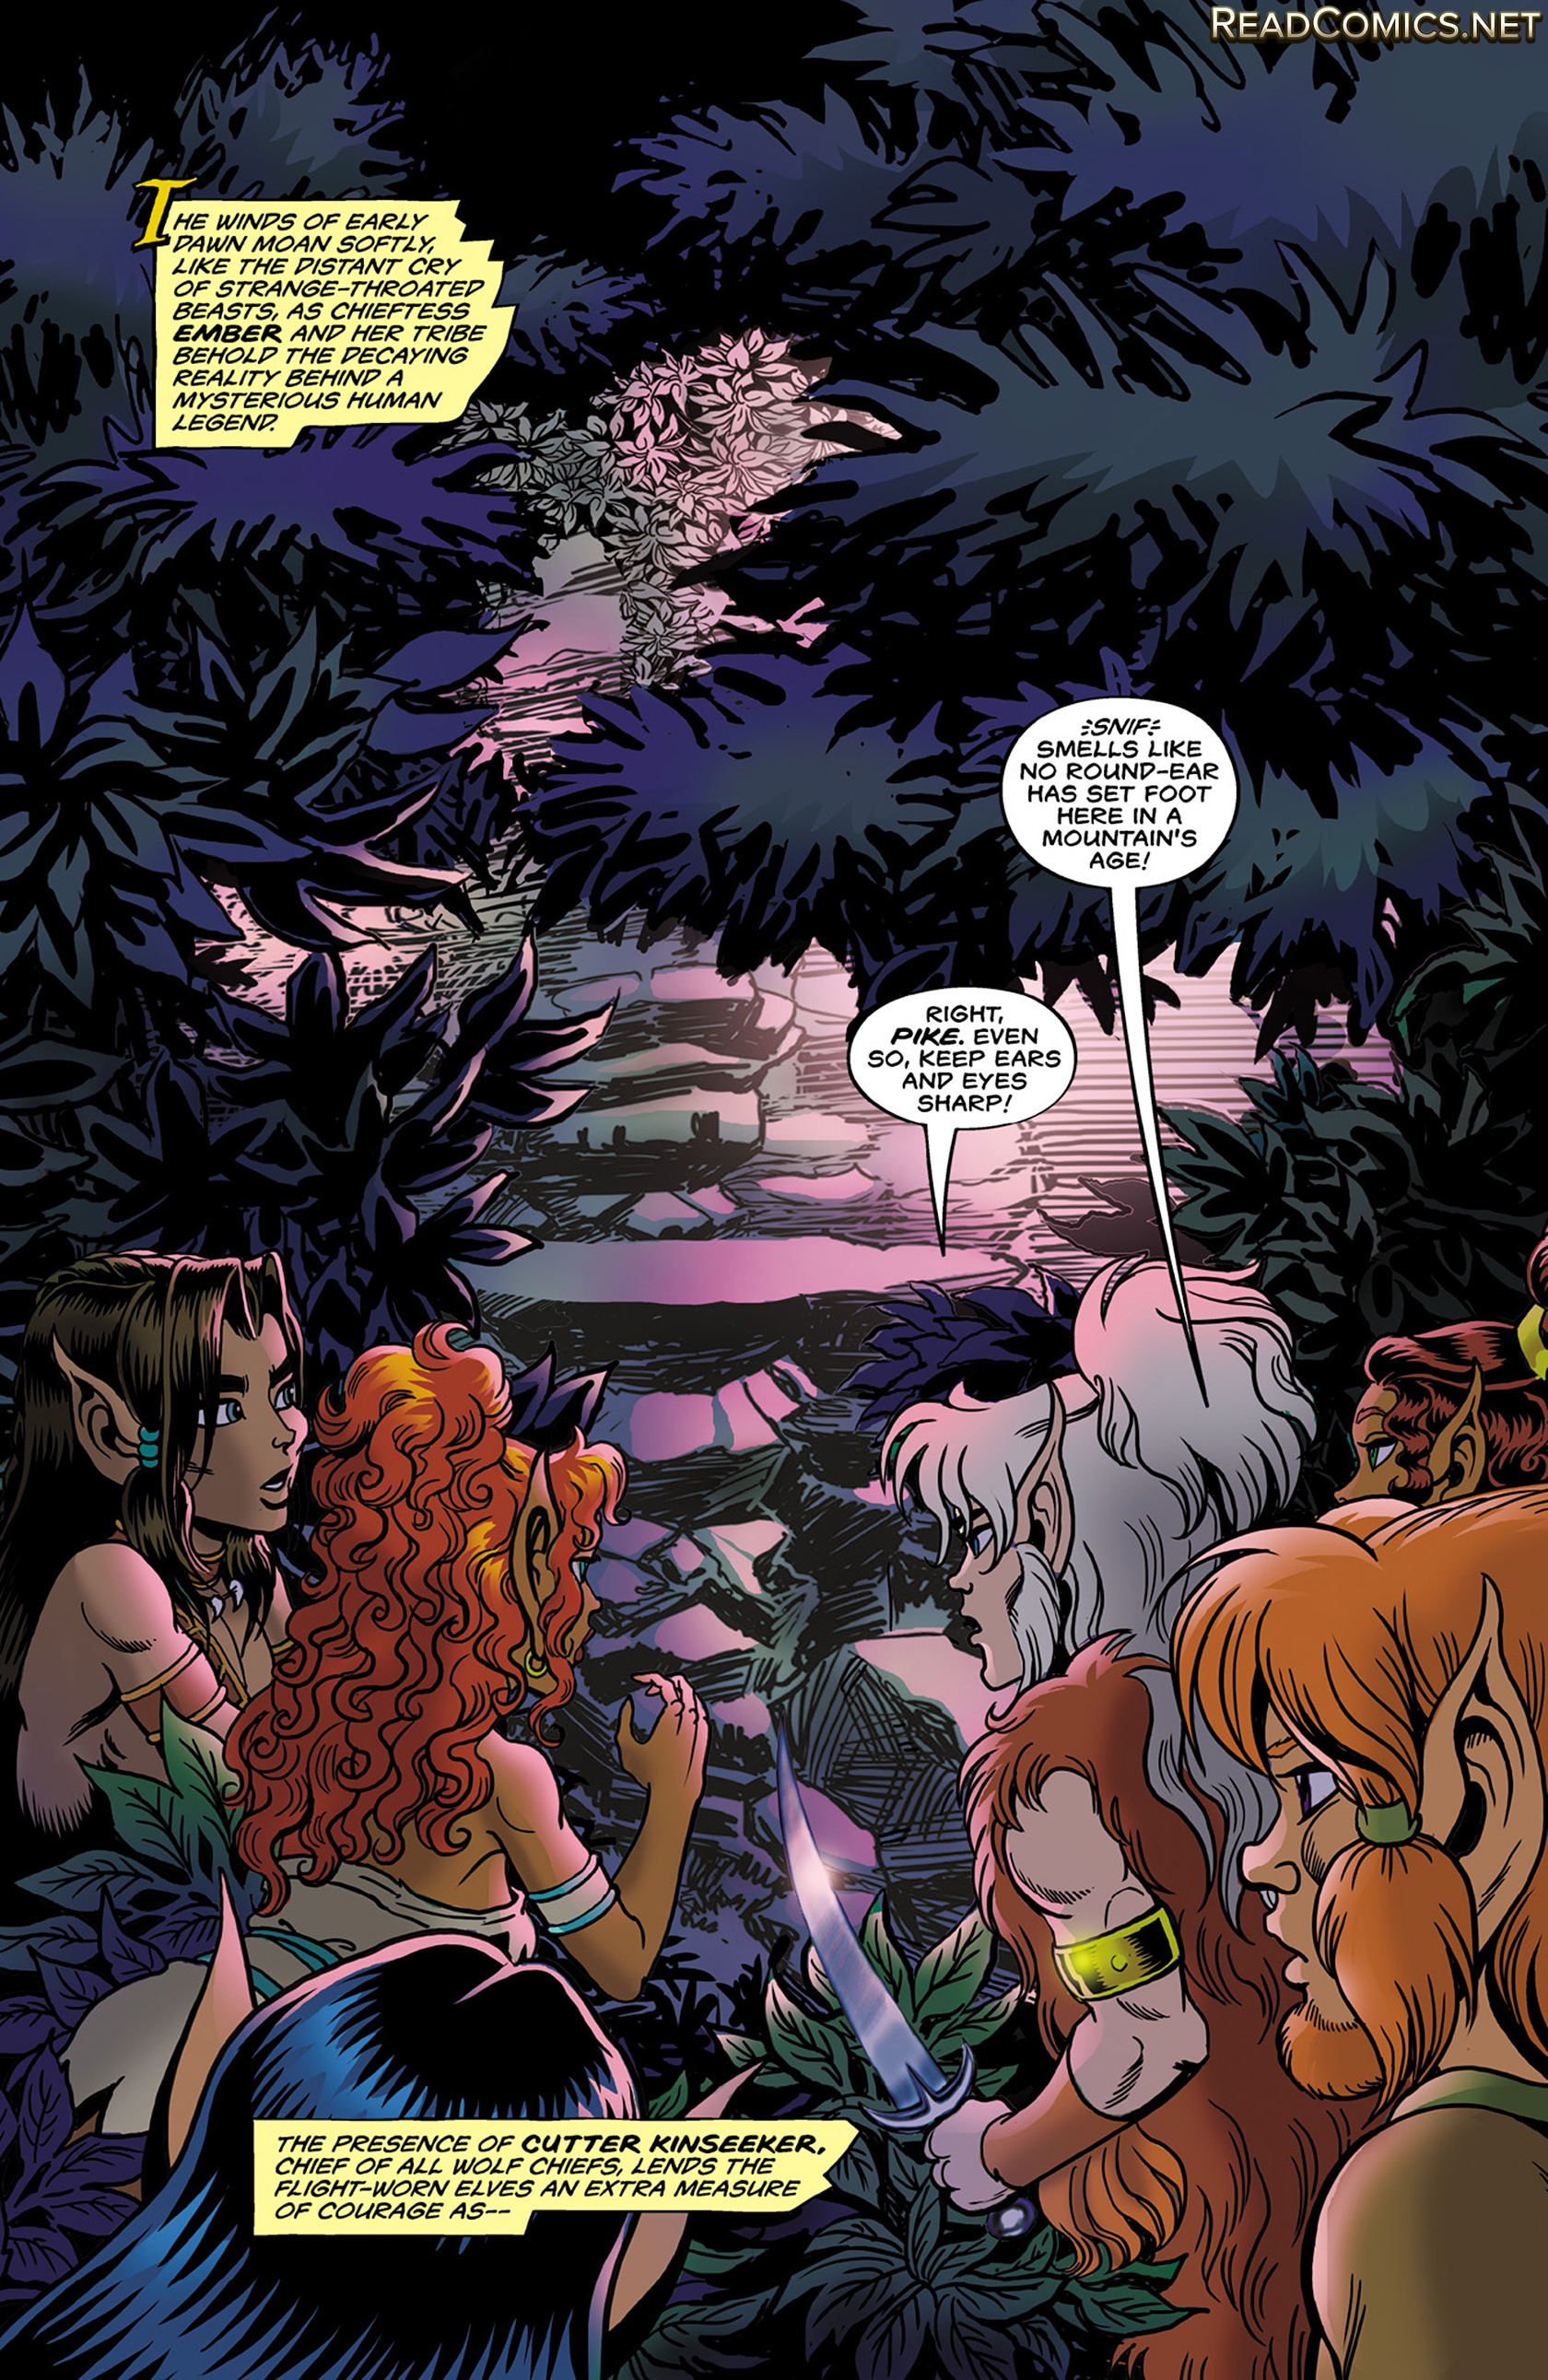 Elfquest: The Final Quest (2015-): Chapter 6 - Page 3